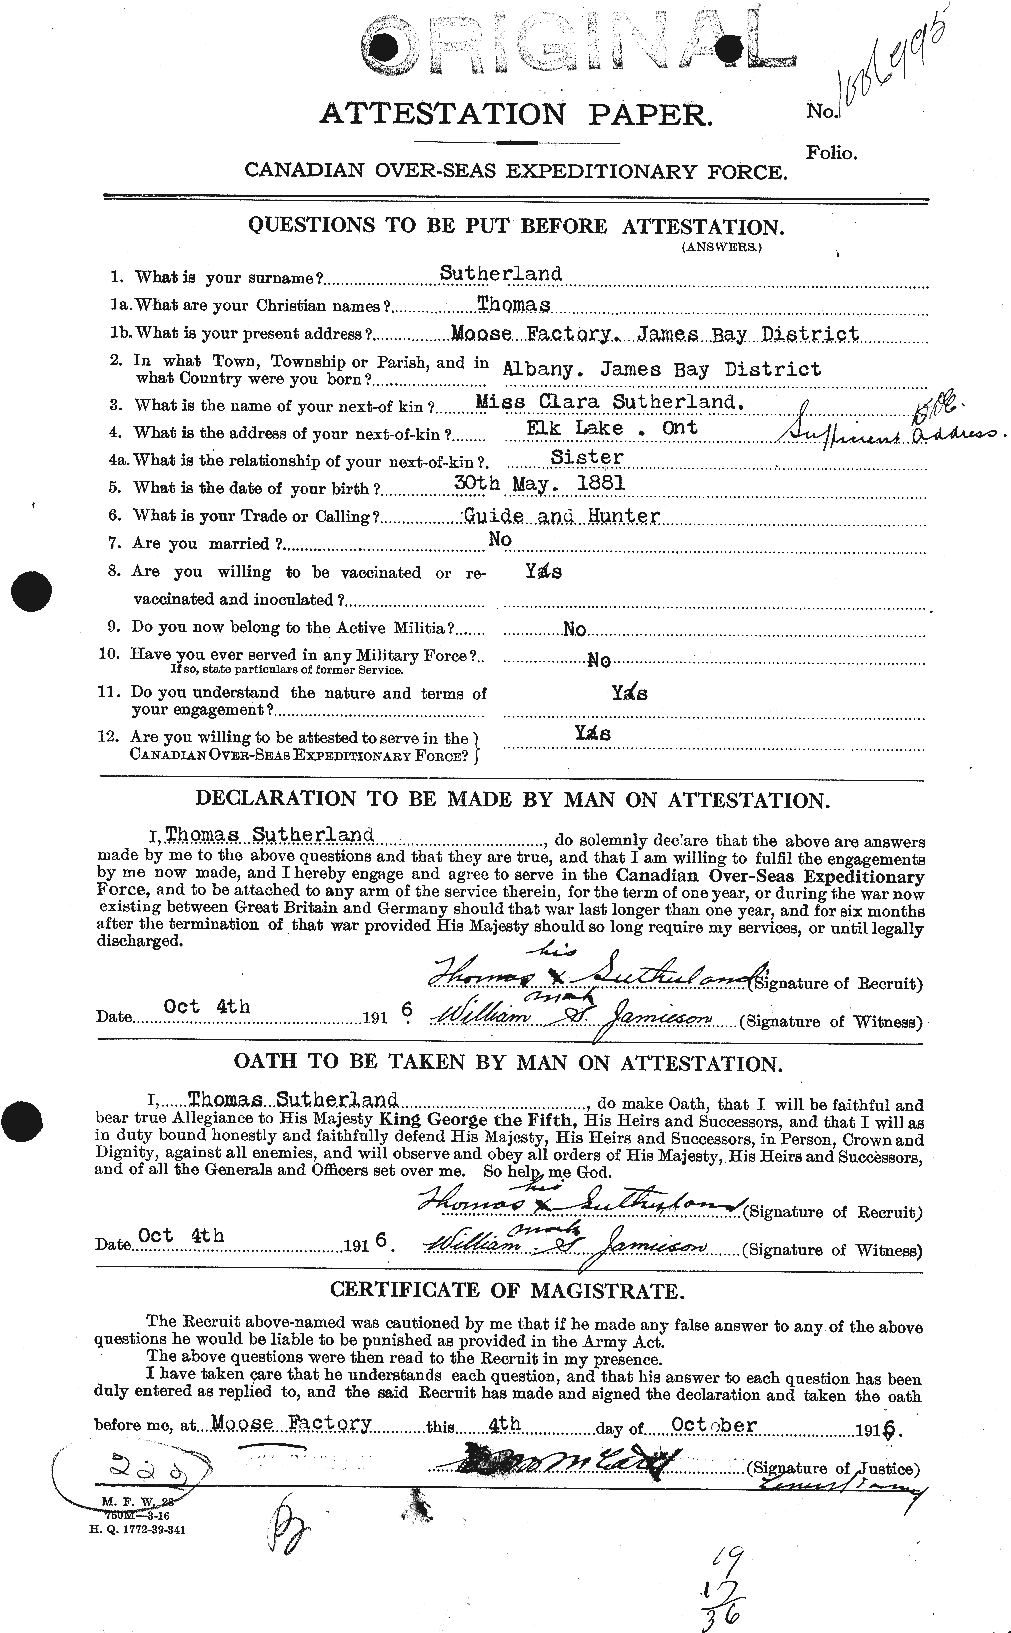 Personnel Records of the First World War - CEF 126554a